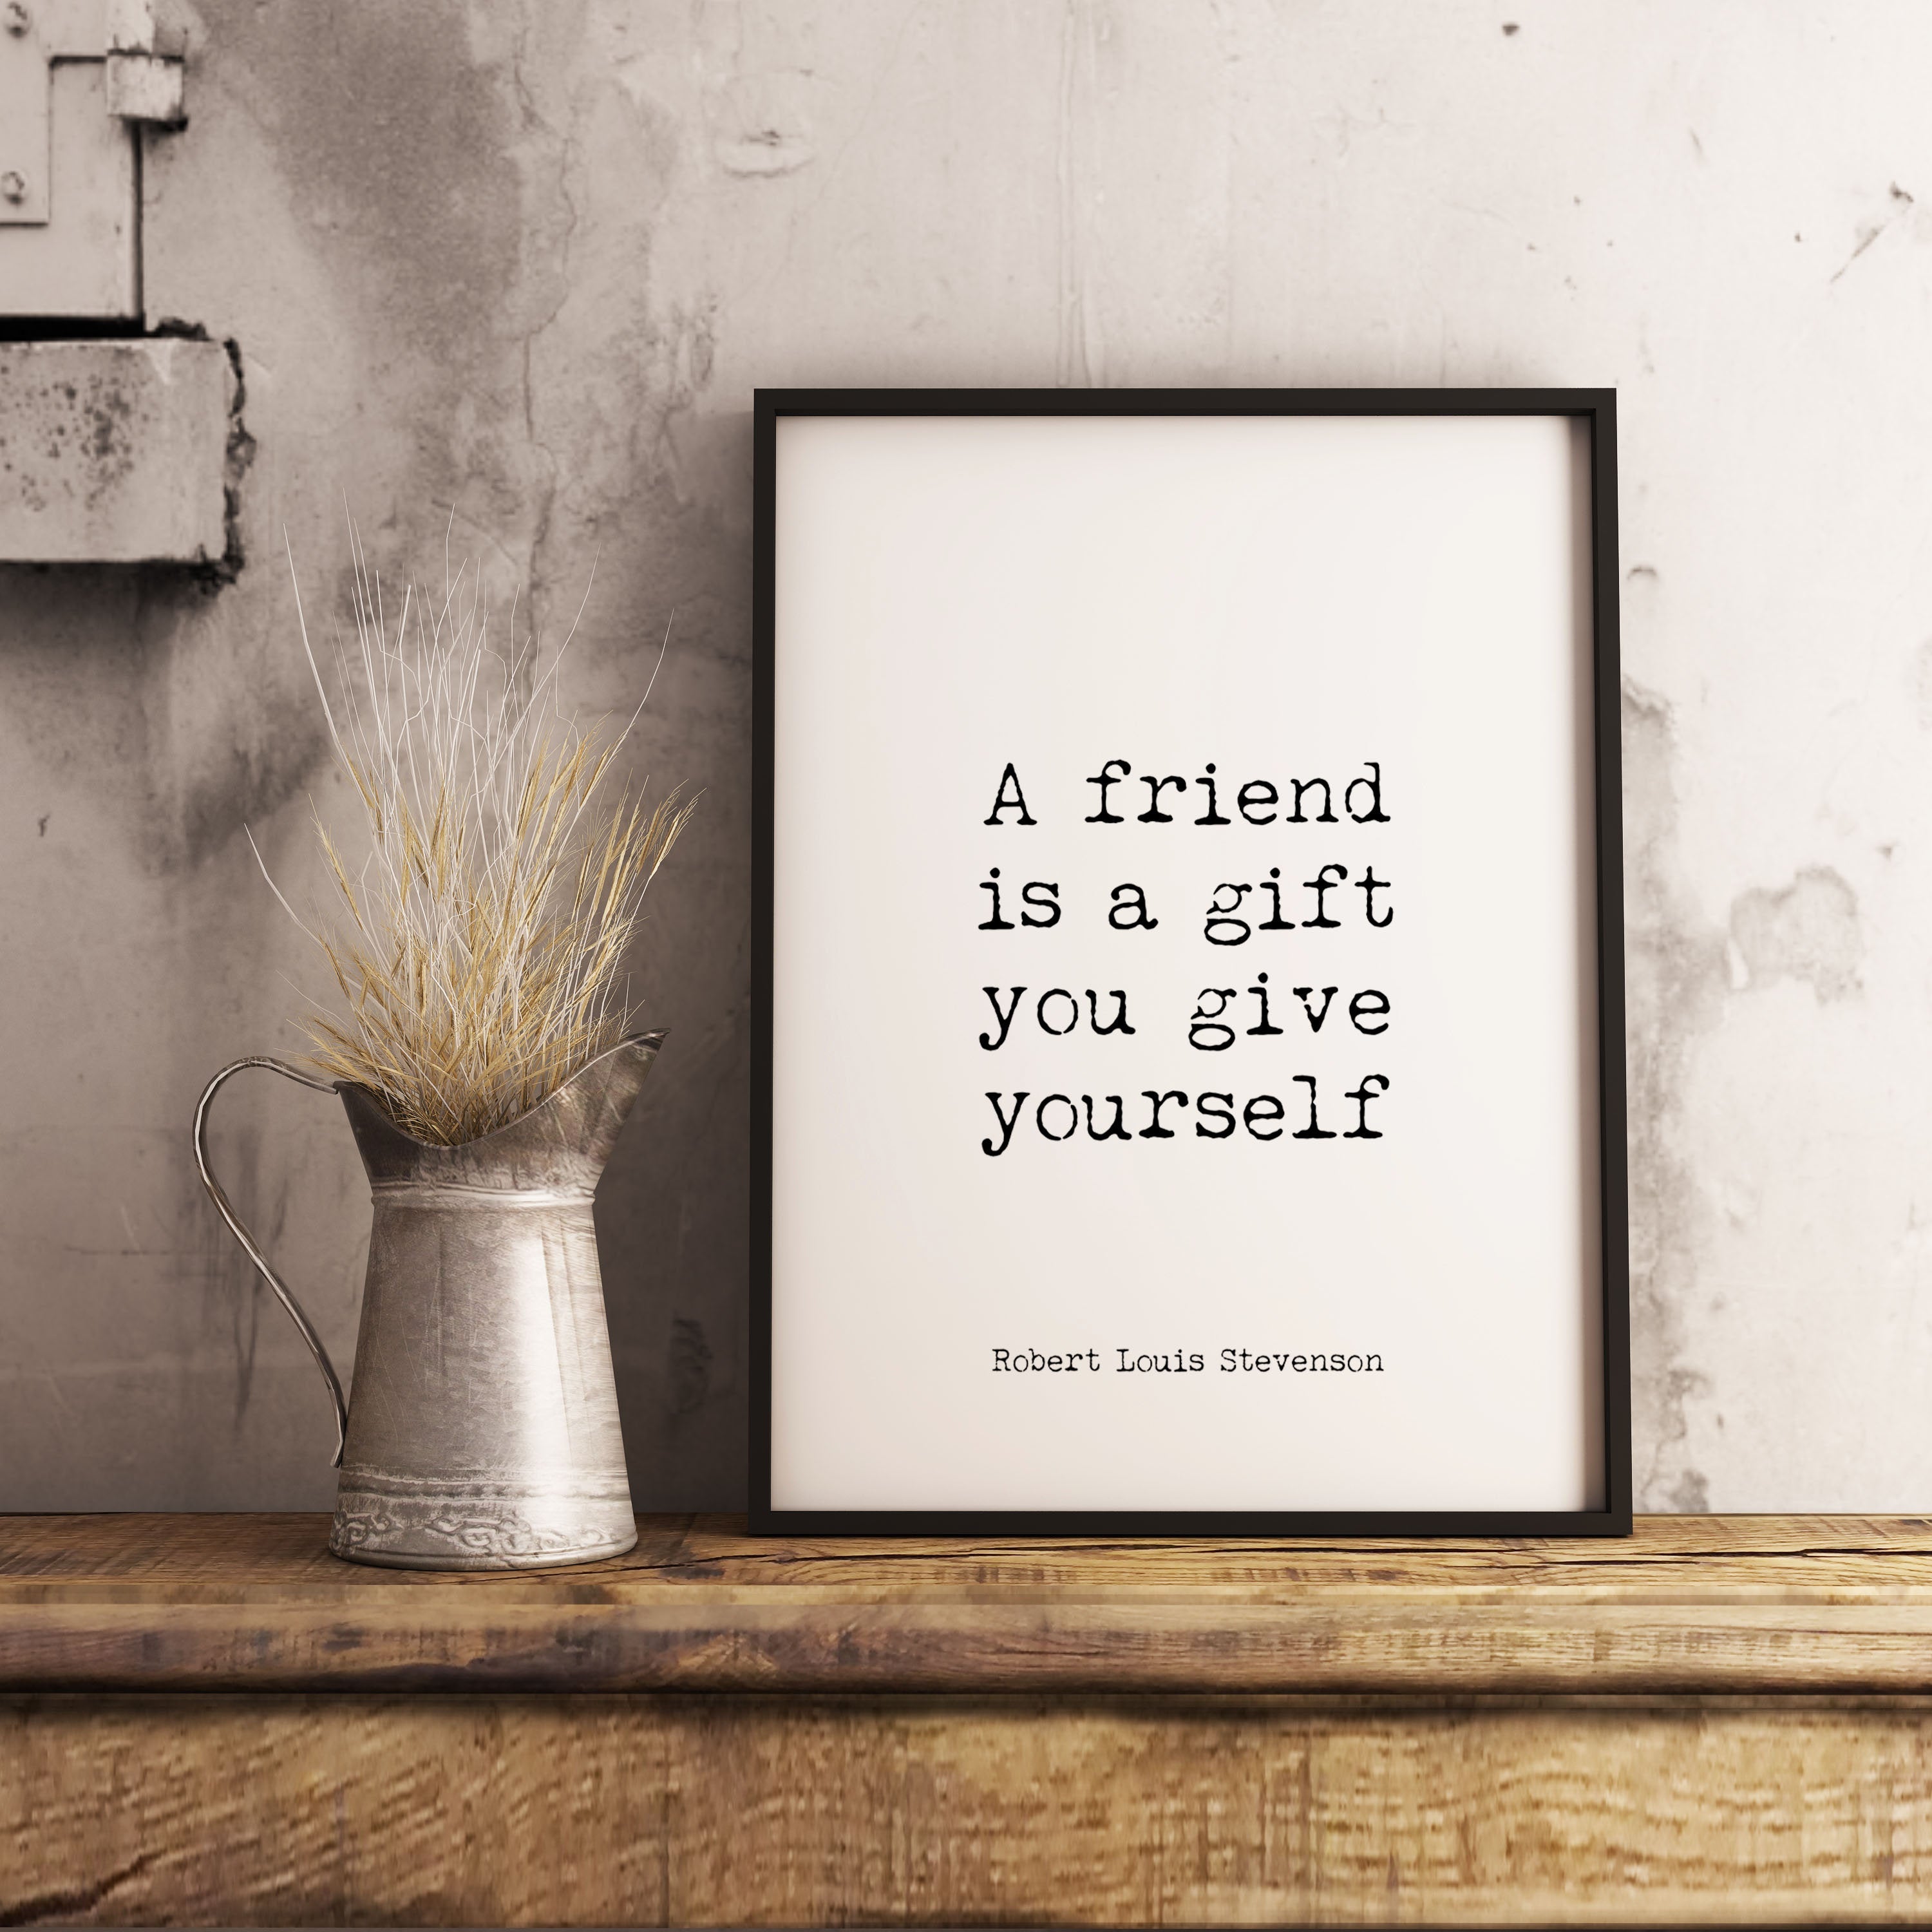 Robert Louis Stevenson Friendship Quote Print in Black & White, Best Friend Gift, A friend is a gift you give yourself - BookQuoteDecor